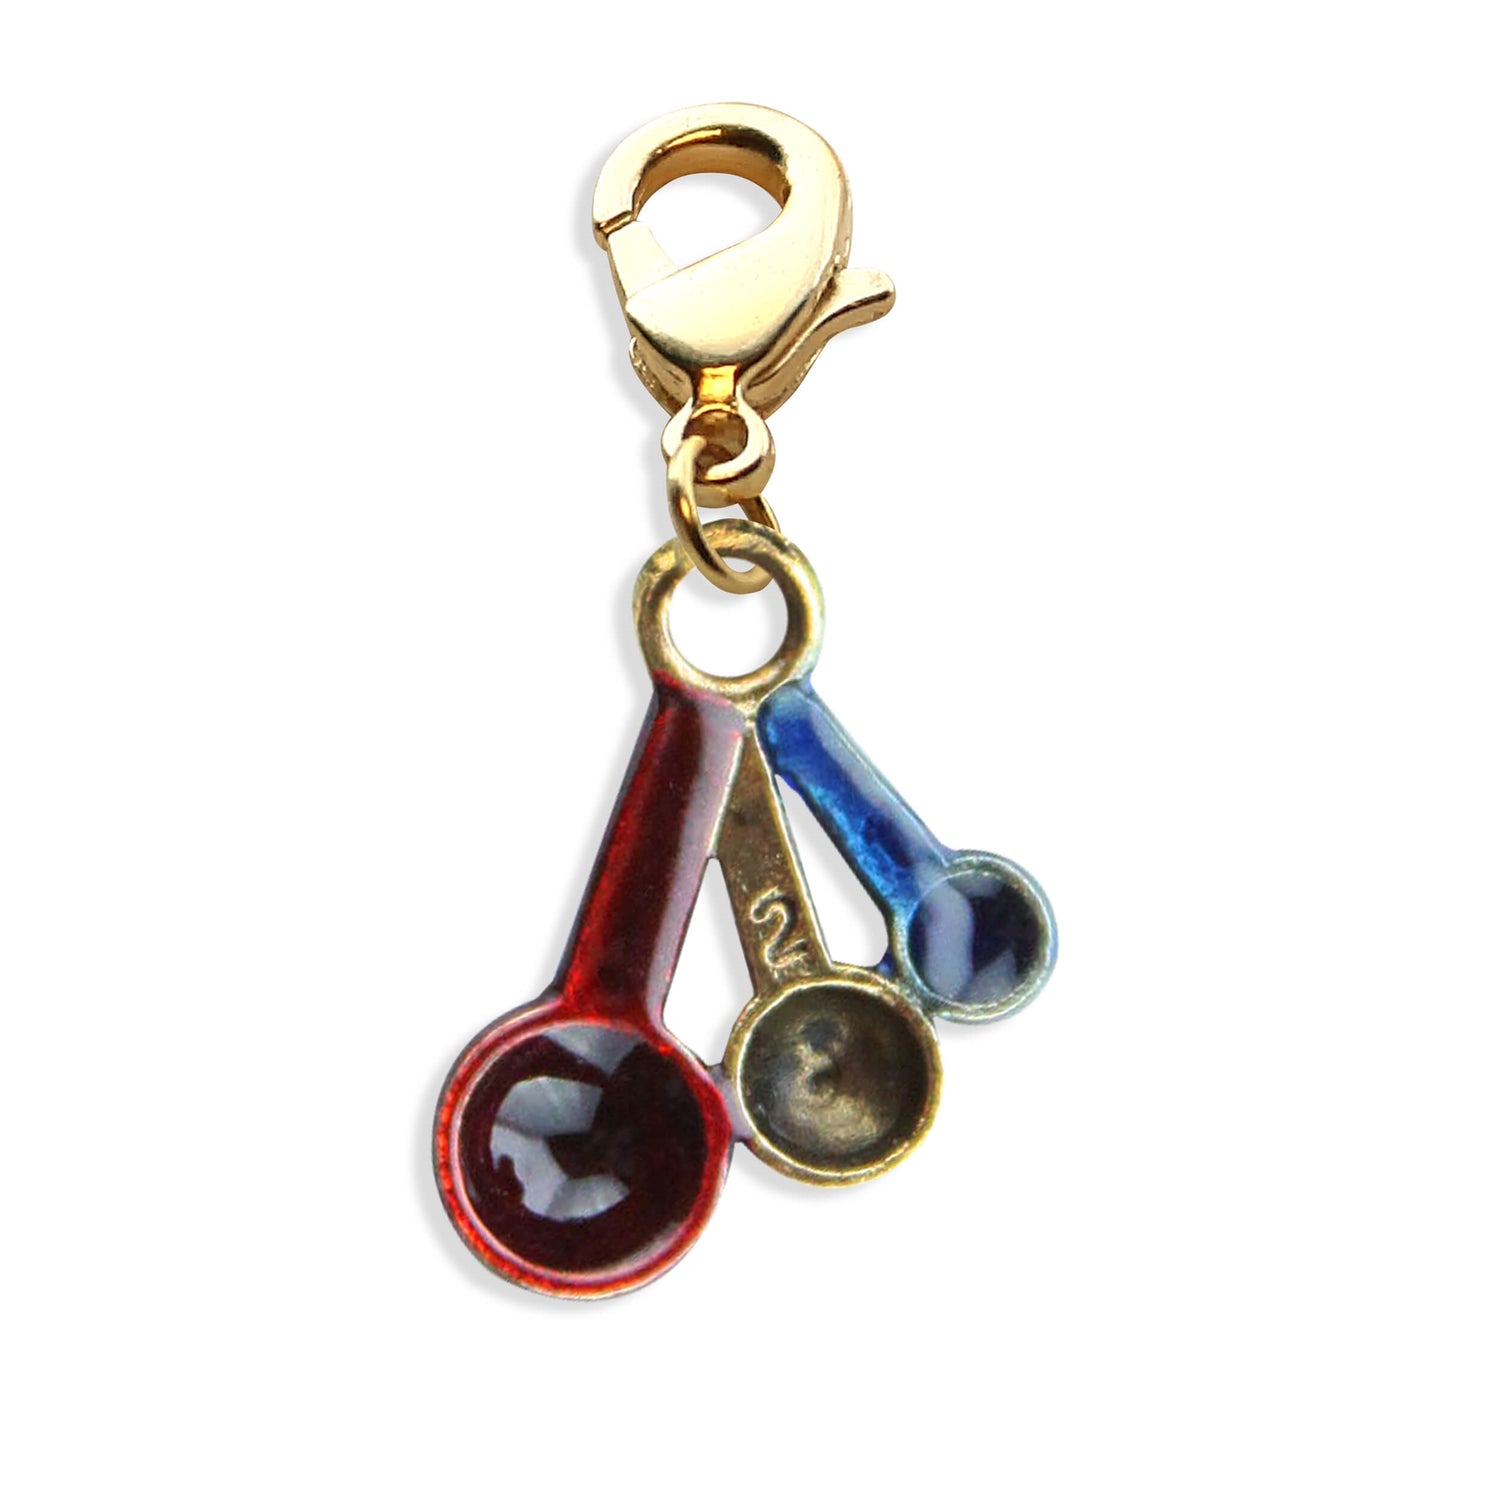 Whimsical Gifts | Measuring Spoons Charm Dangle in Gold Finish | Hobbies & Special Interests | Chef | Cooking | Baking Charm Dangle